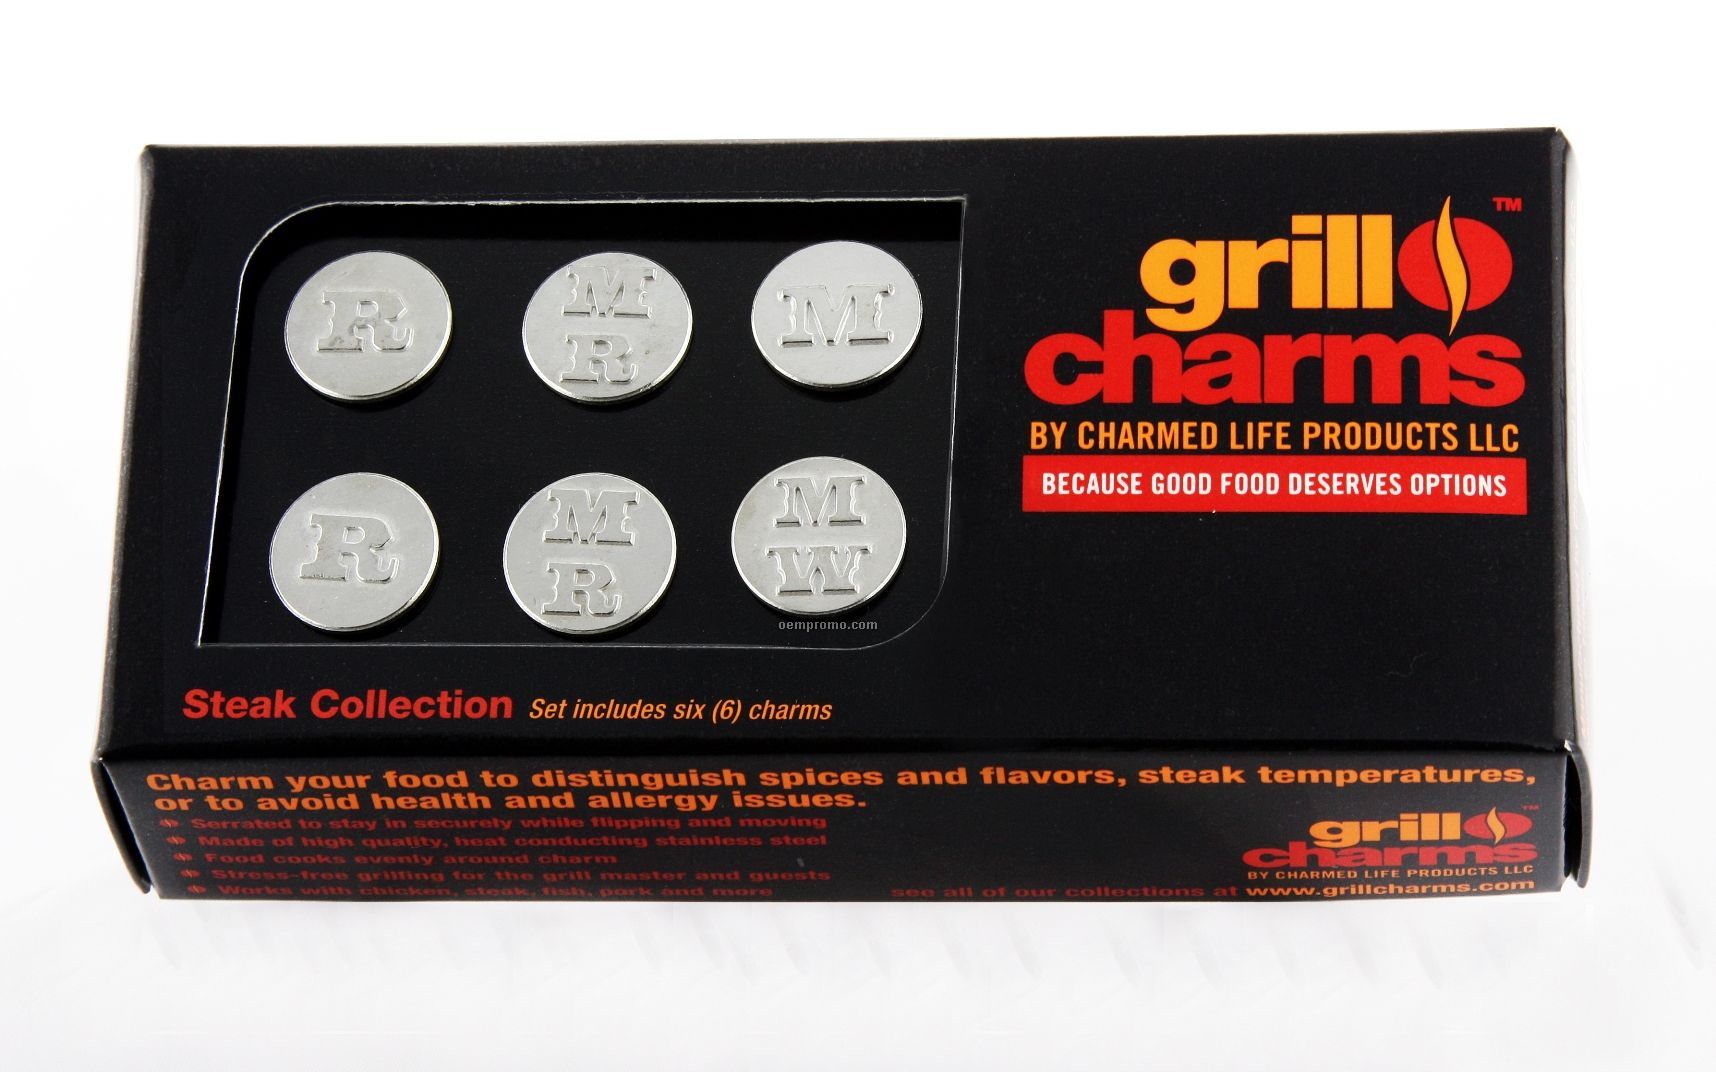 Blank Steak Collection Grill Charms